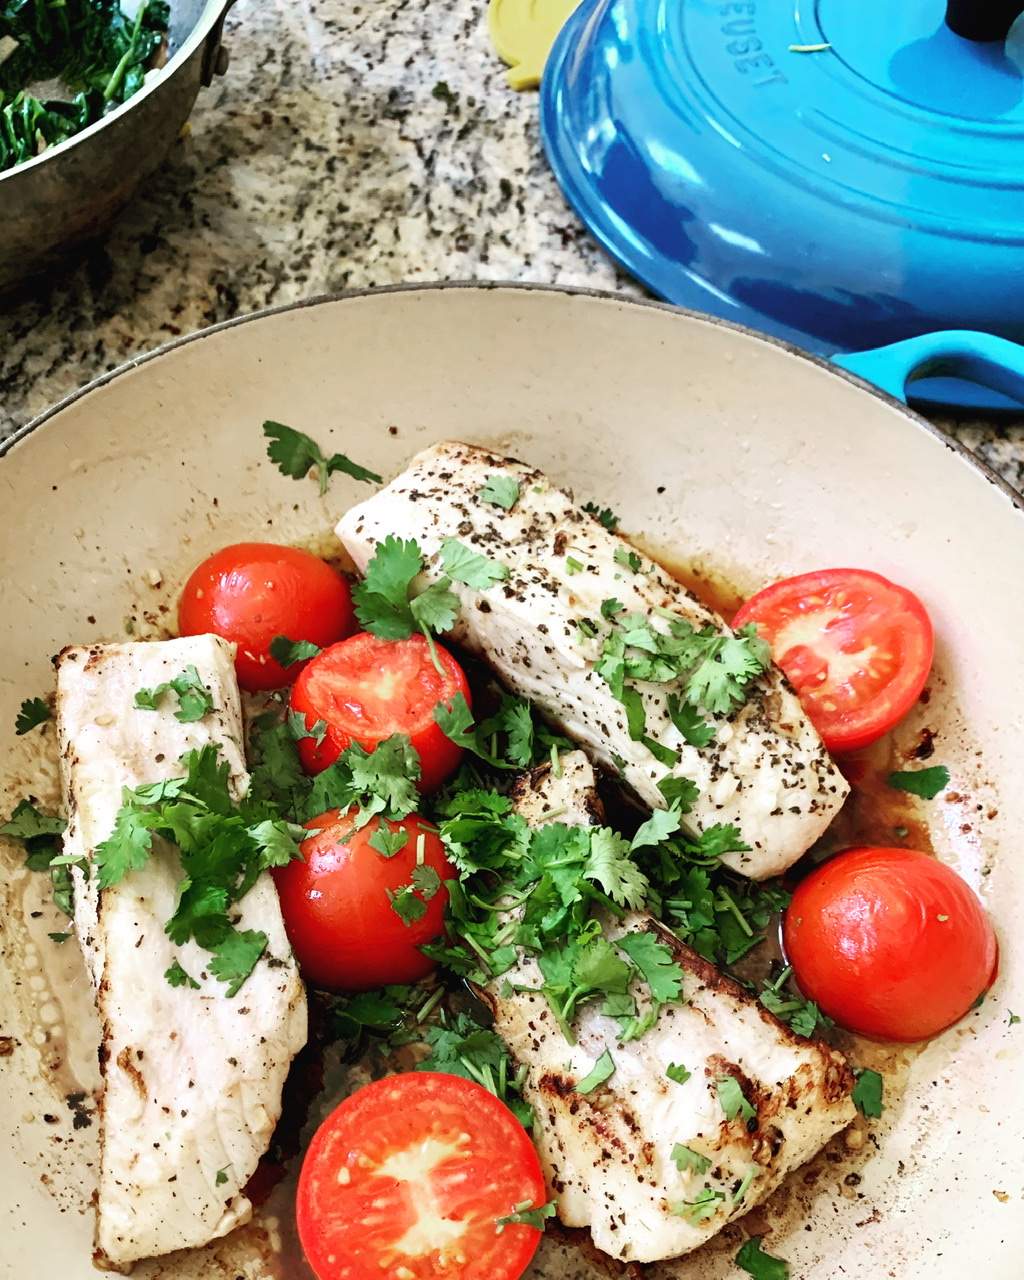 Fish in a Hurry: Easy Pan-Seared Halibut using my Favorite Marinade